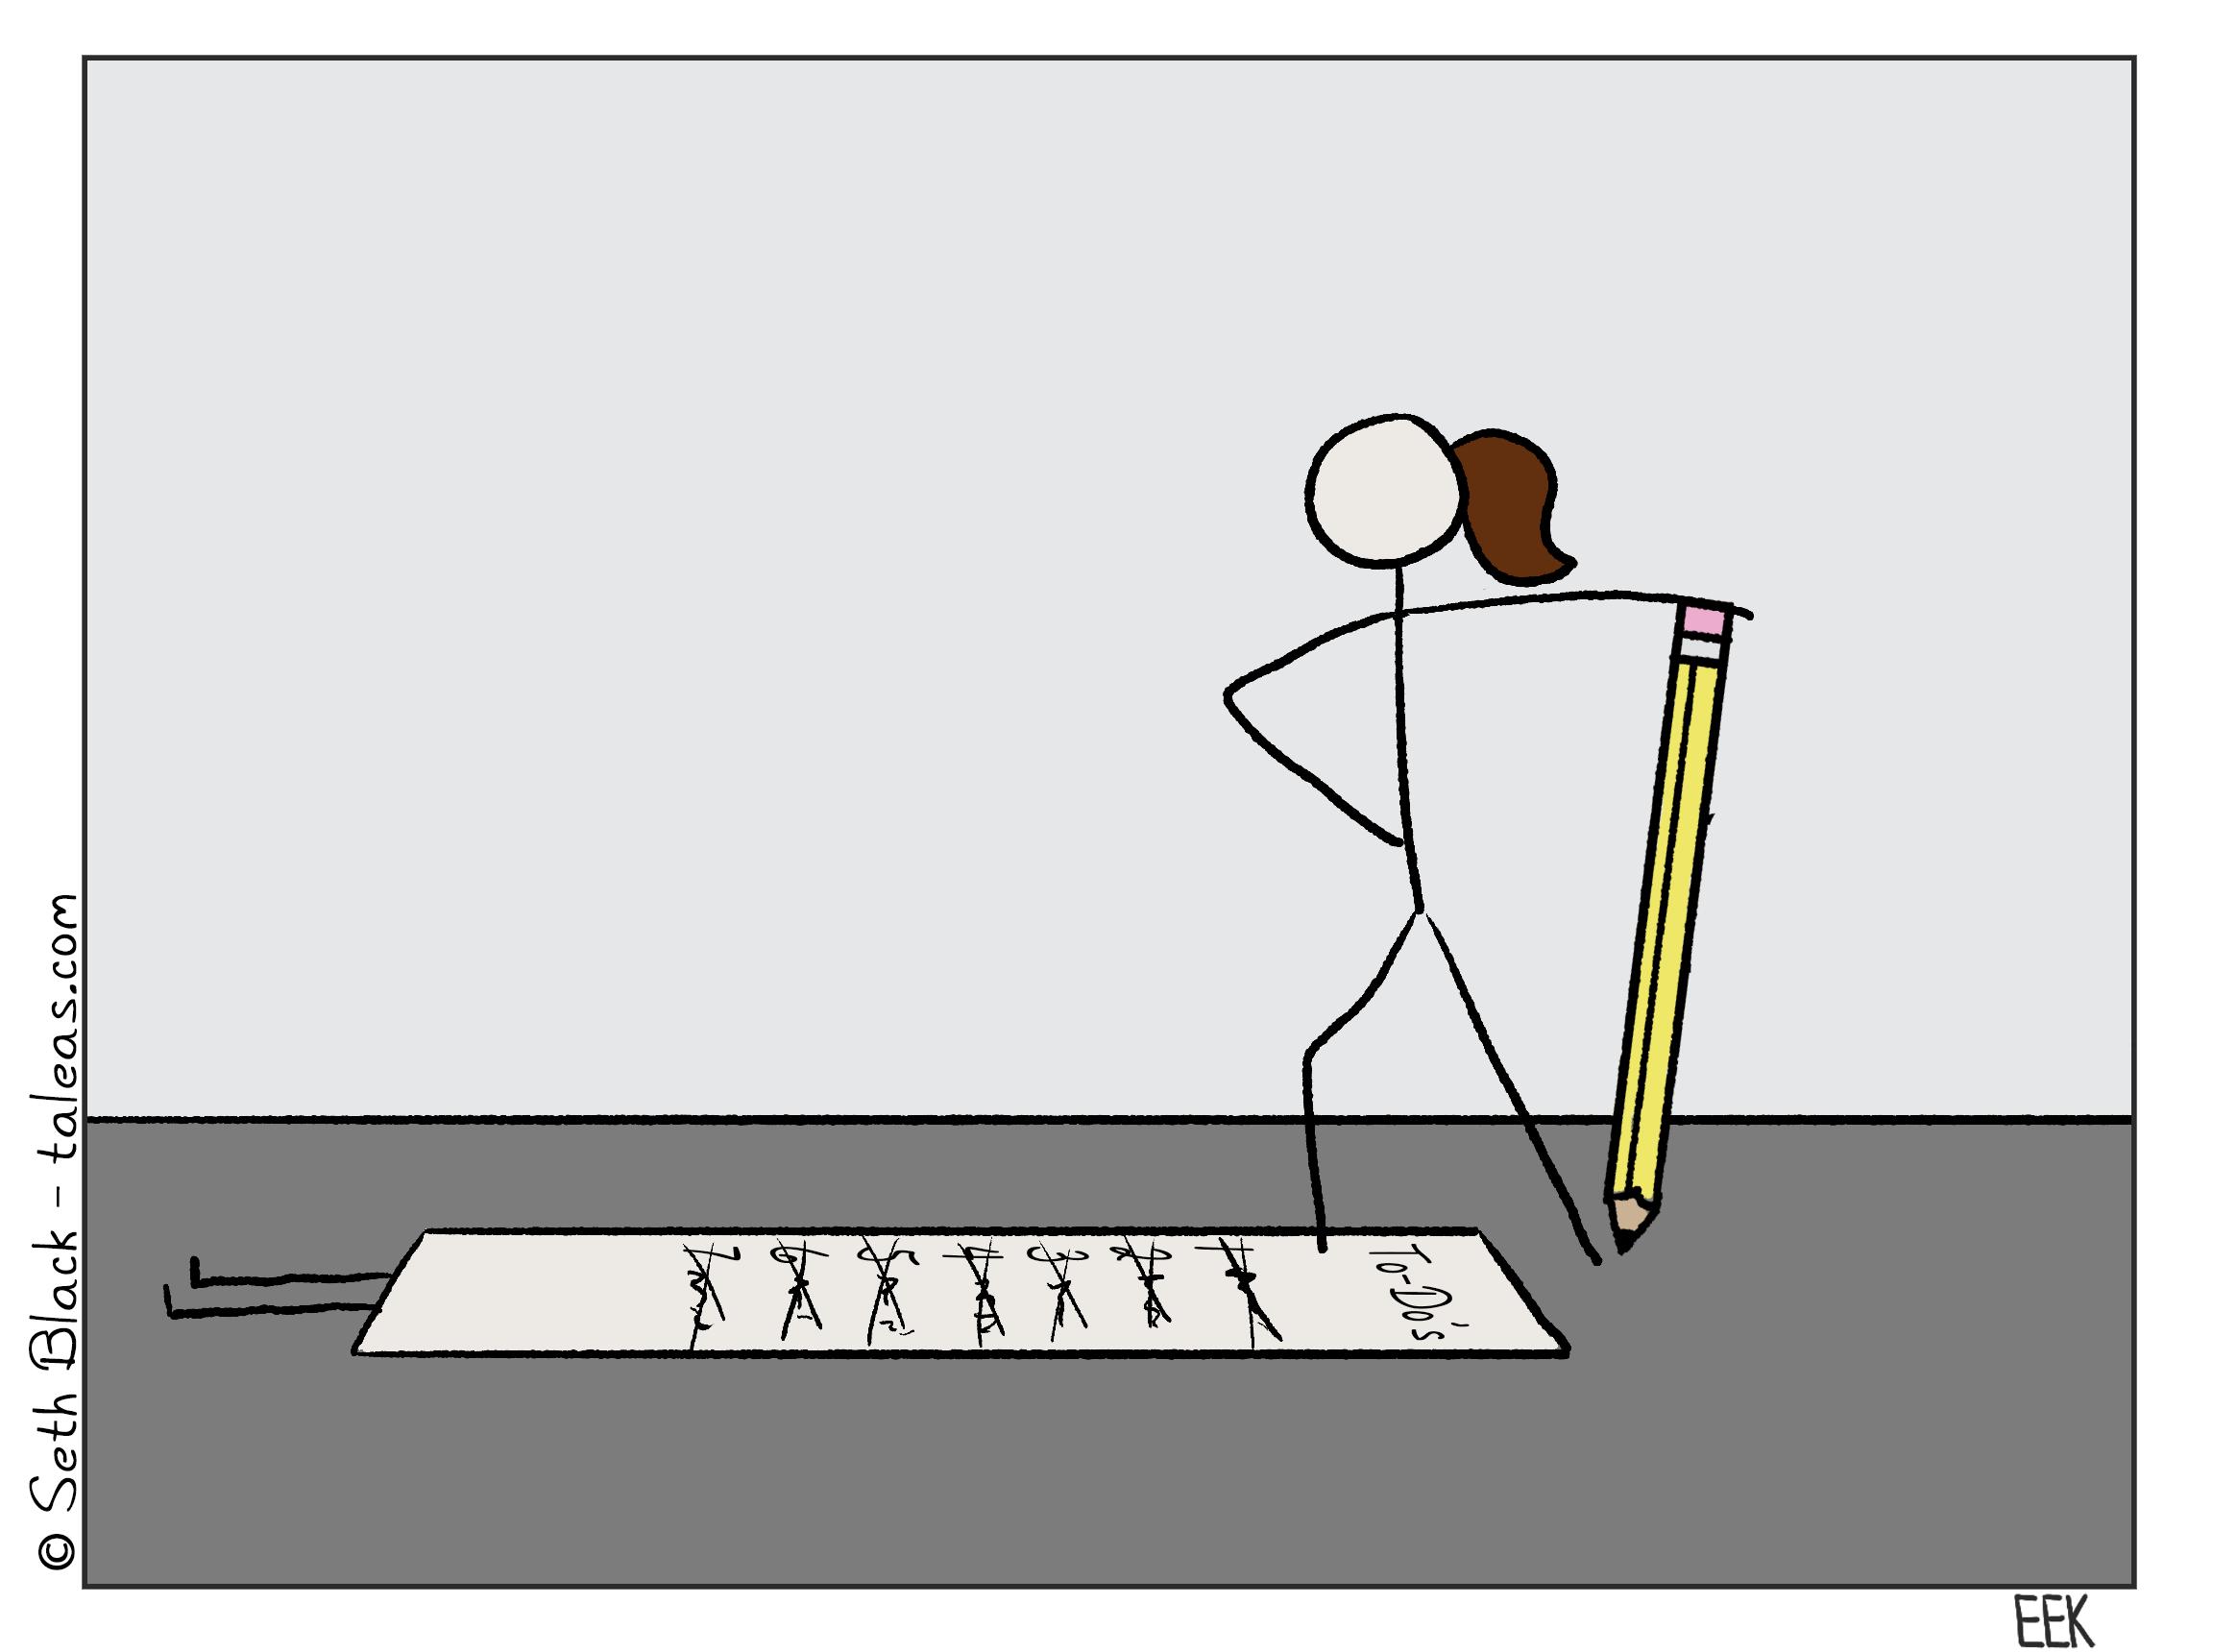 A female stick figure stands, holding a large pencil, victoriously over a defeated todo list.